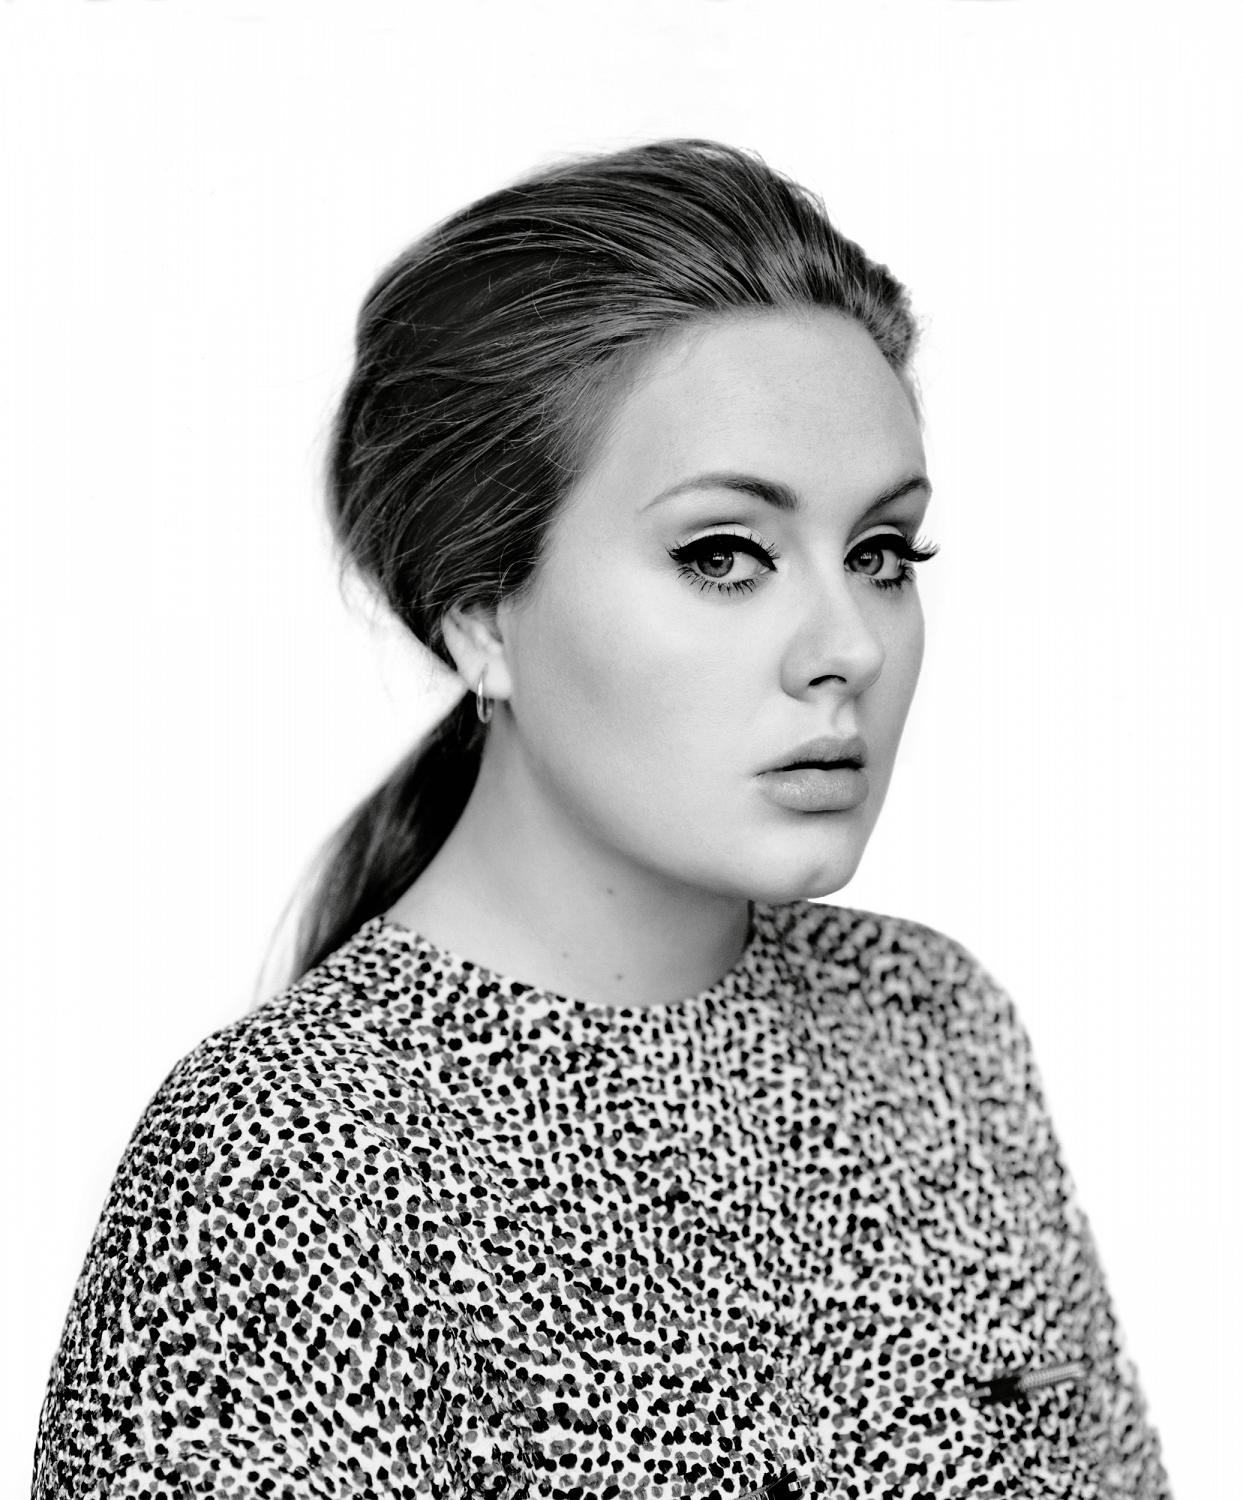 Adele Forgot The Lyrics to One of Her Own Songs: Watch – Billboard